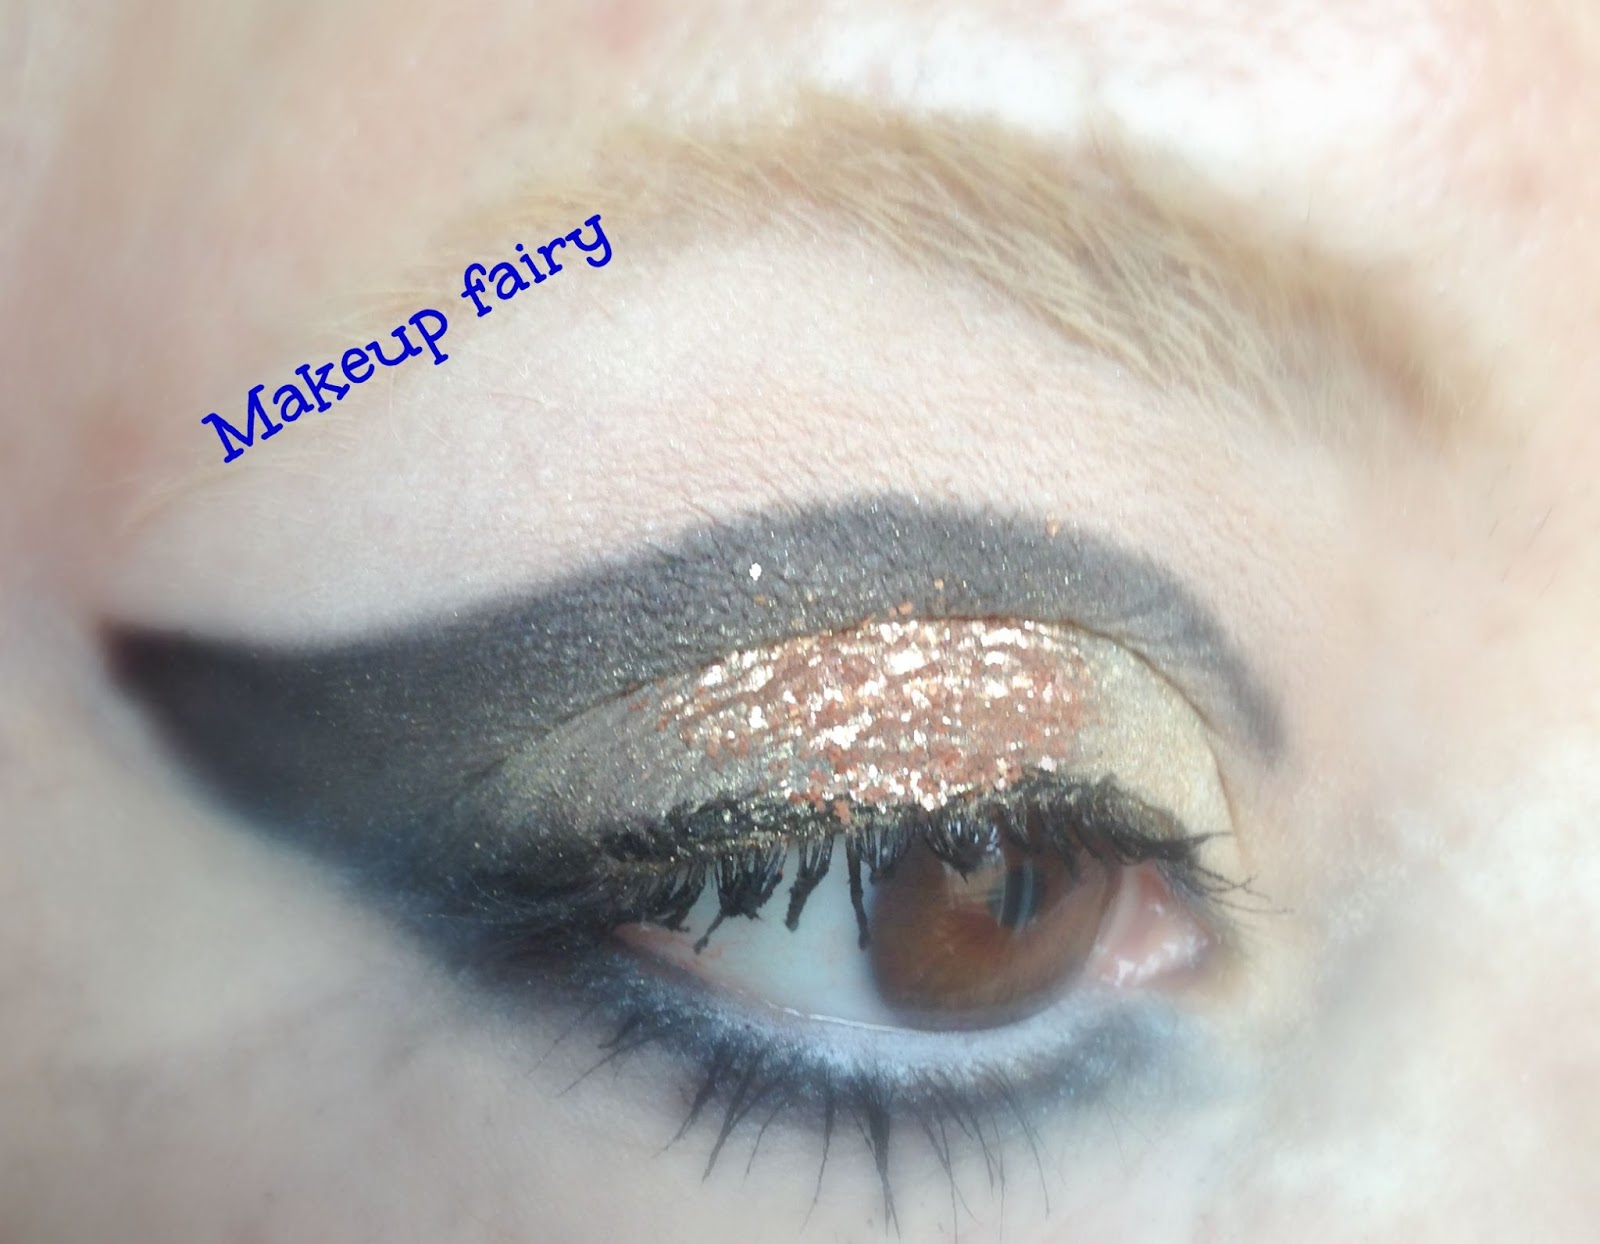 Sparkly Eye Makeup Tinklesmakeup Eye Makeup Look Black And Sparkly Gold Cut Crease